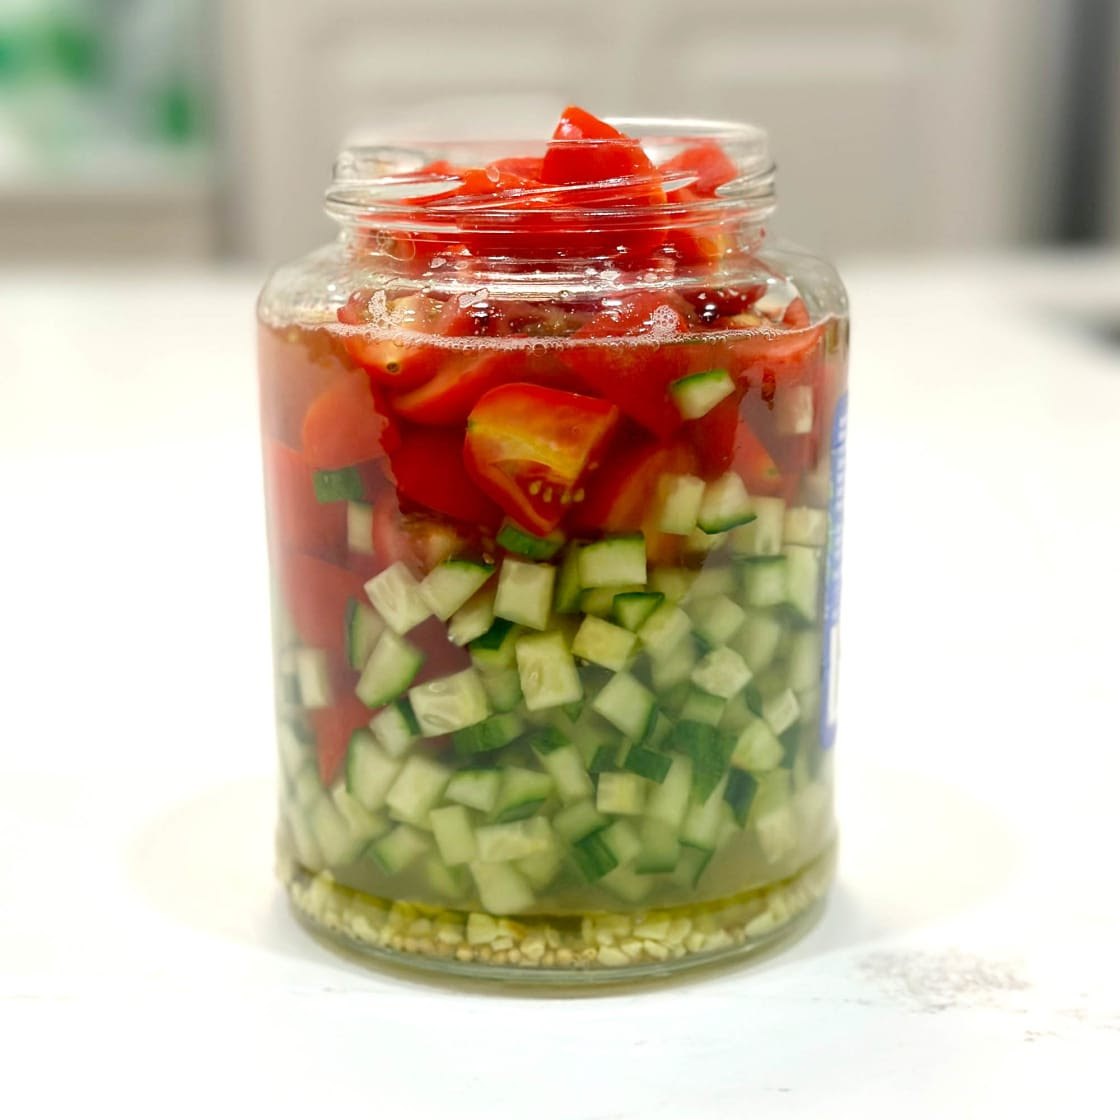 An improved mood, better sleep, getting off medications and being able to lift heavier weights are the type of confidence boosters Pickle-Jar-Tomato-Cucumber-Salad-mc-230810-dfe6f0